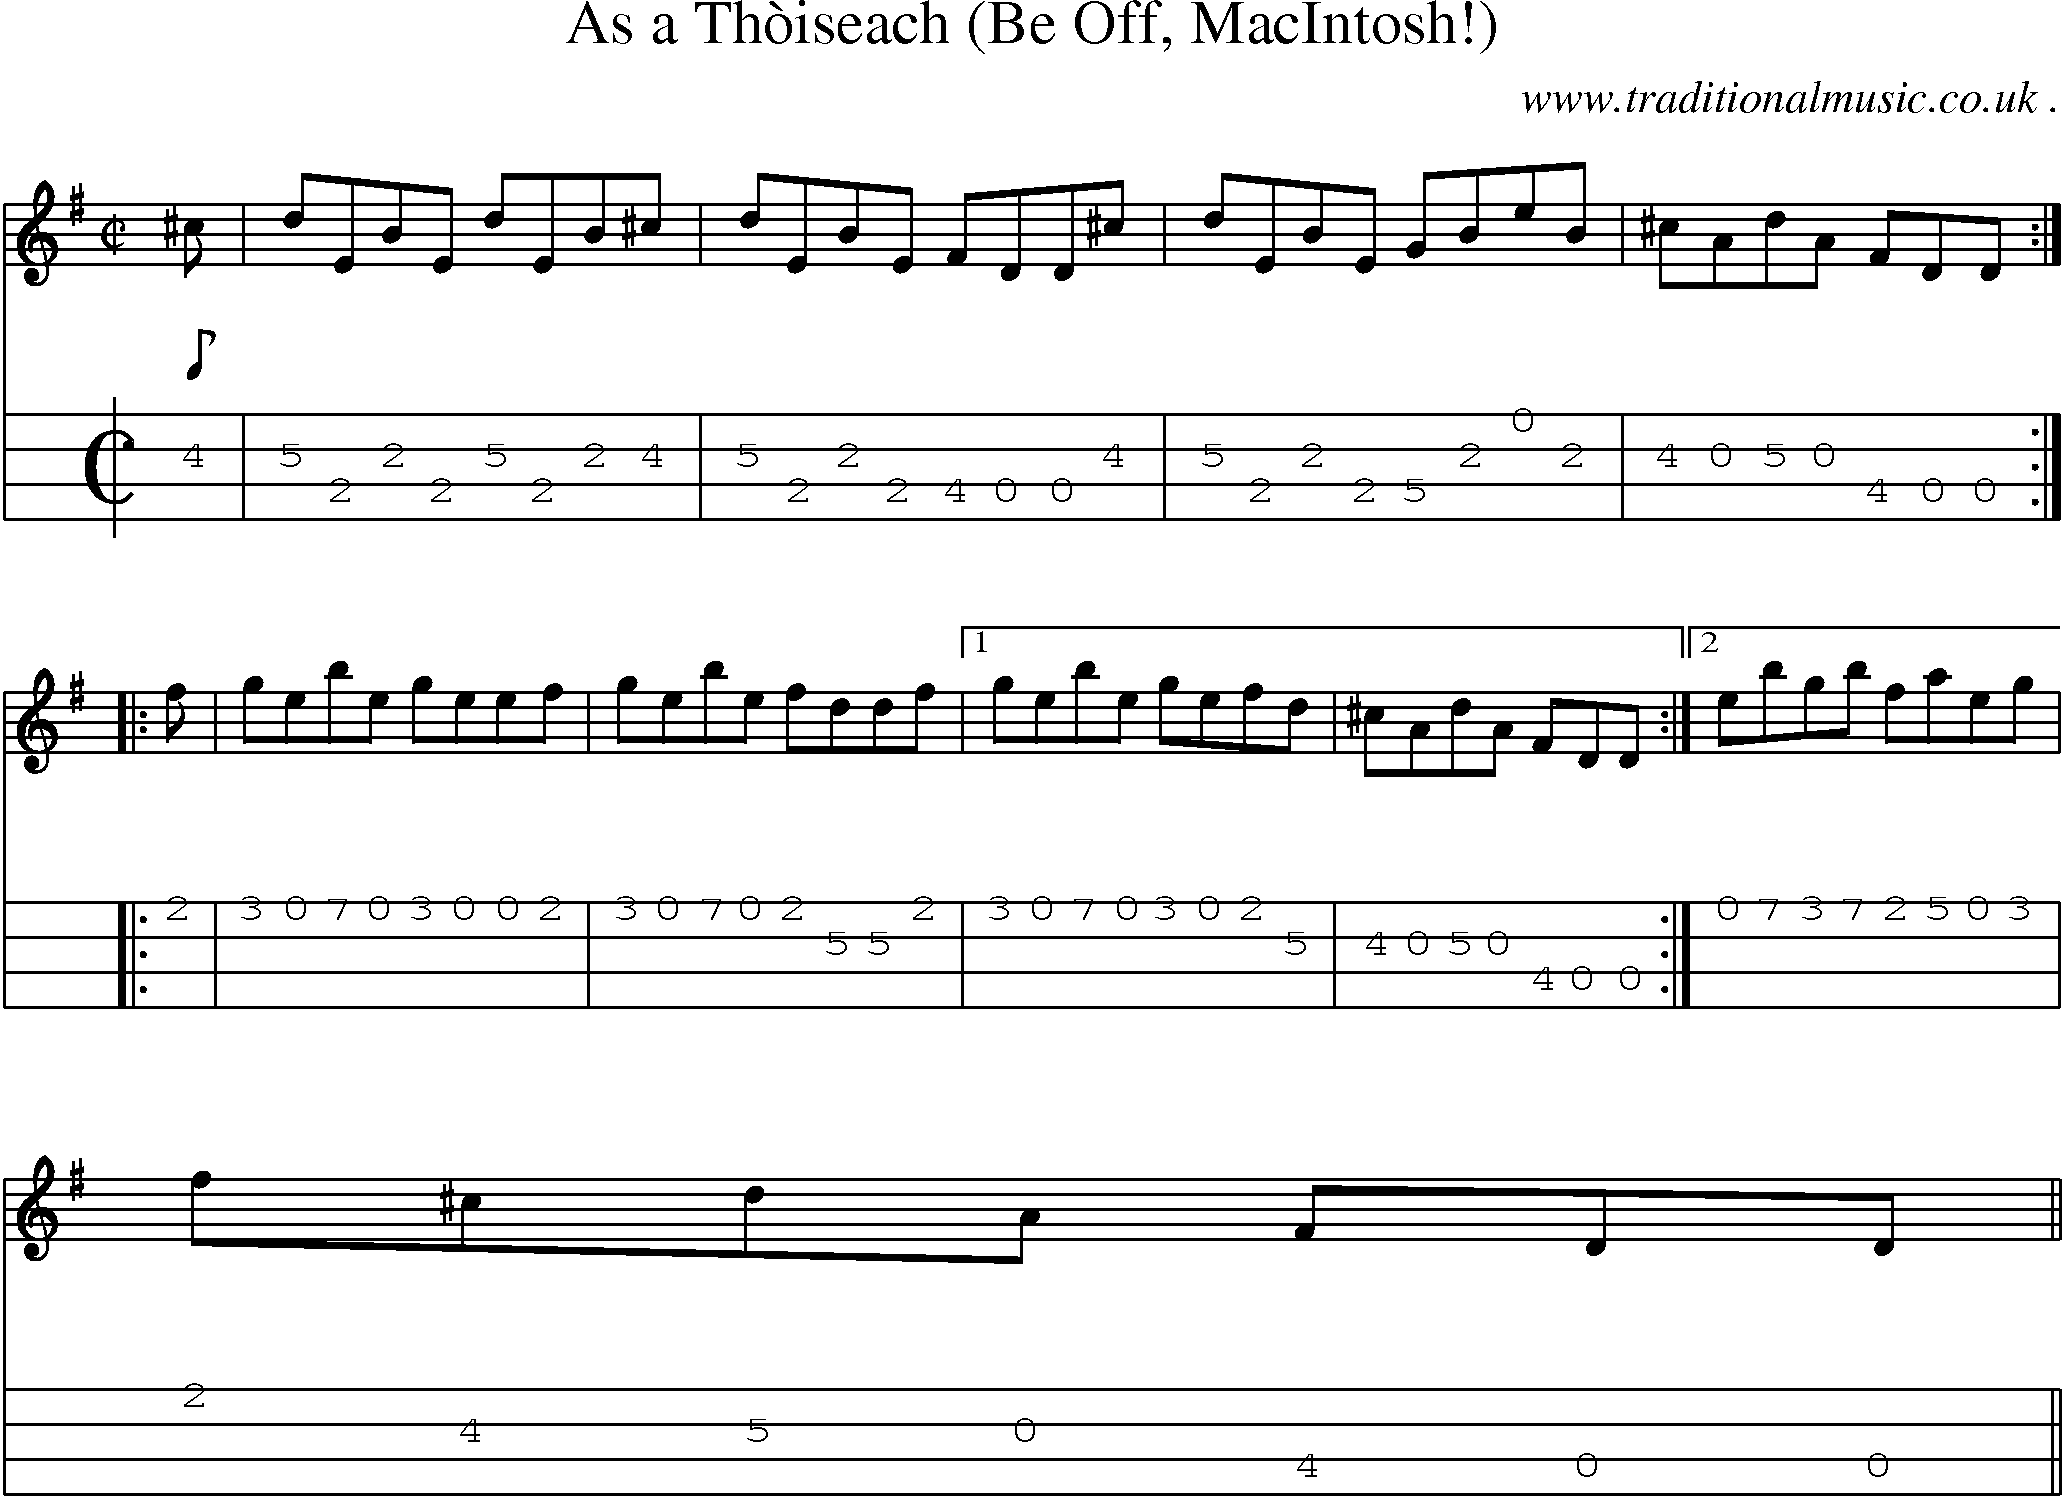 Sheet-music  score, Chords and Mandolin Tabs for As A Thoiseach Be Off Macintosh!